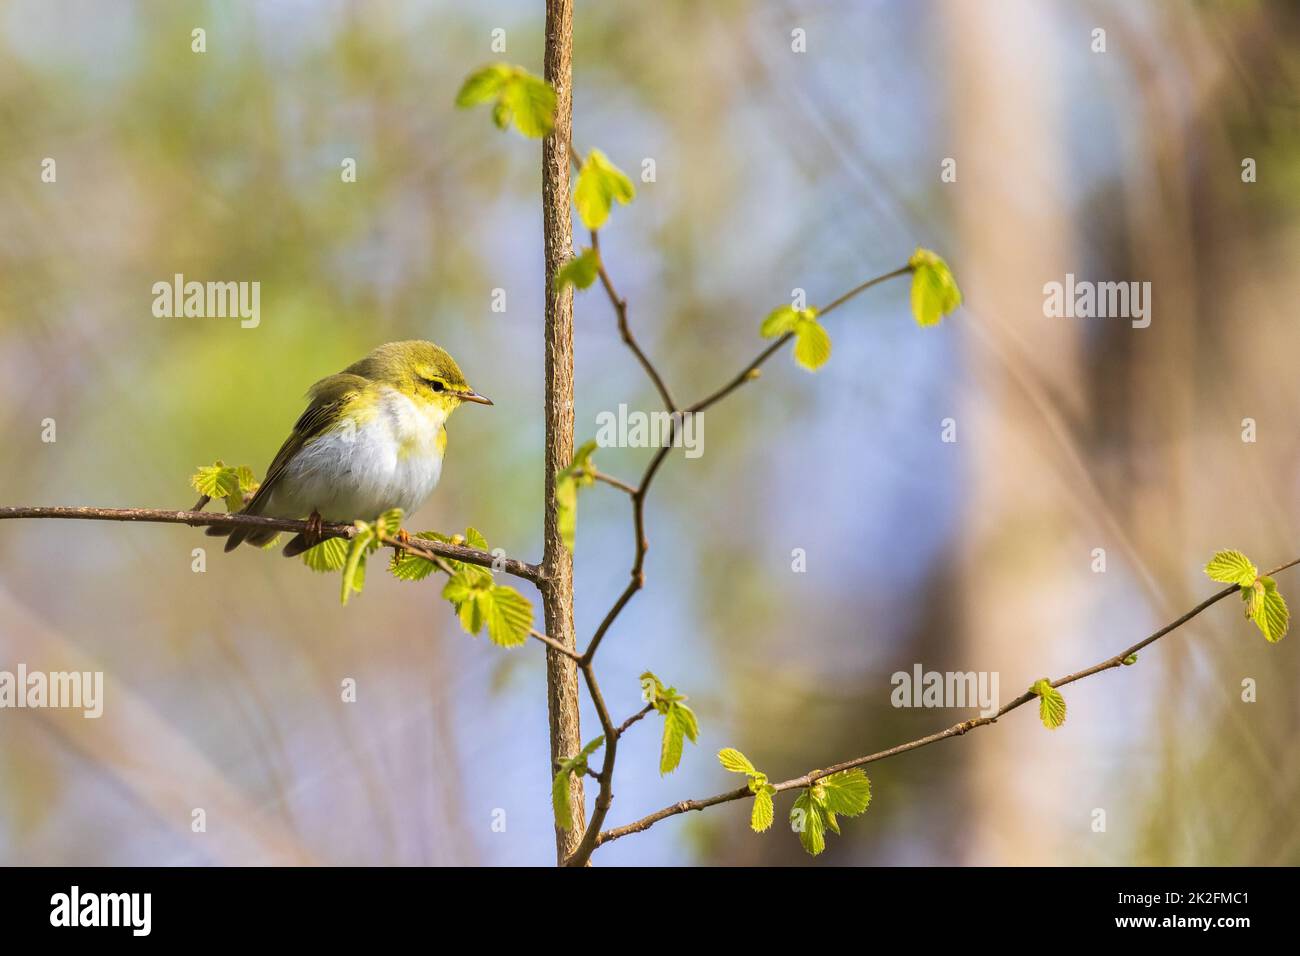 Cute Willow warbler sitting in a budding tree at spring Stock Photo